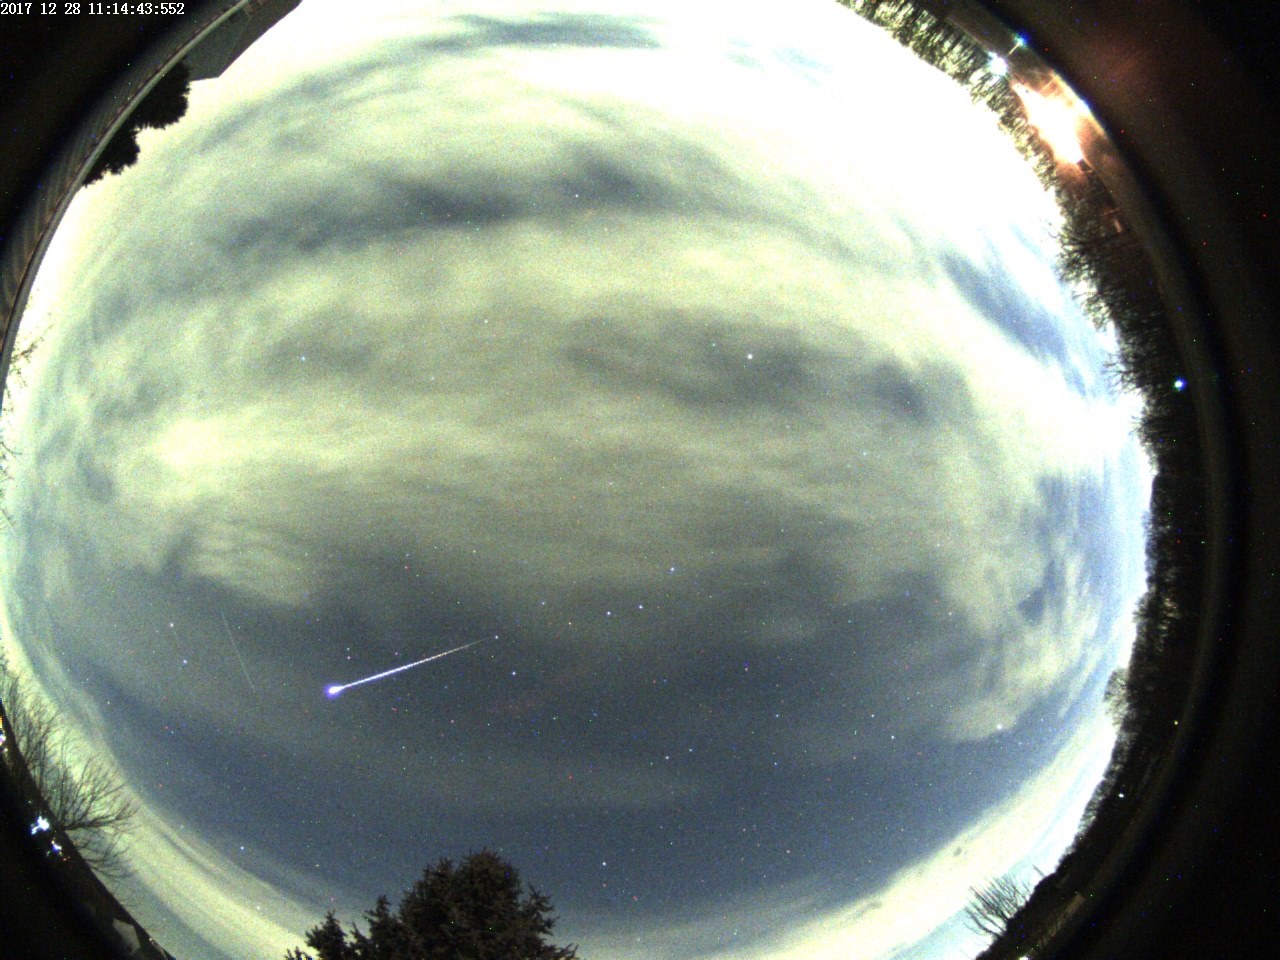 Captured this meteor the first night after you added JPG output!